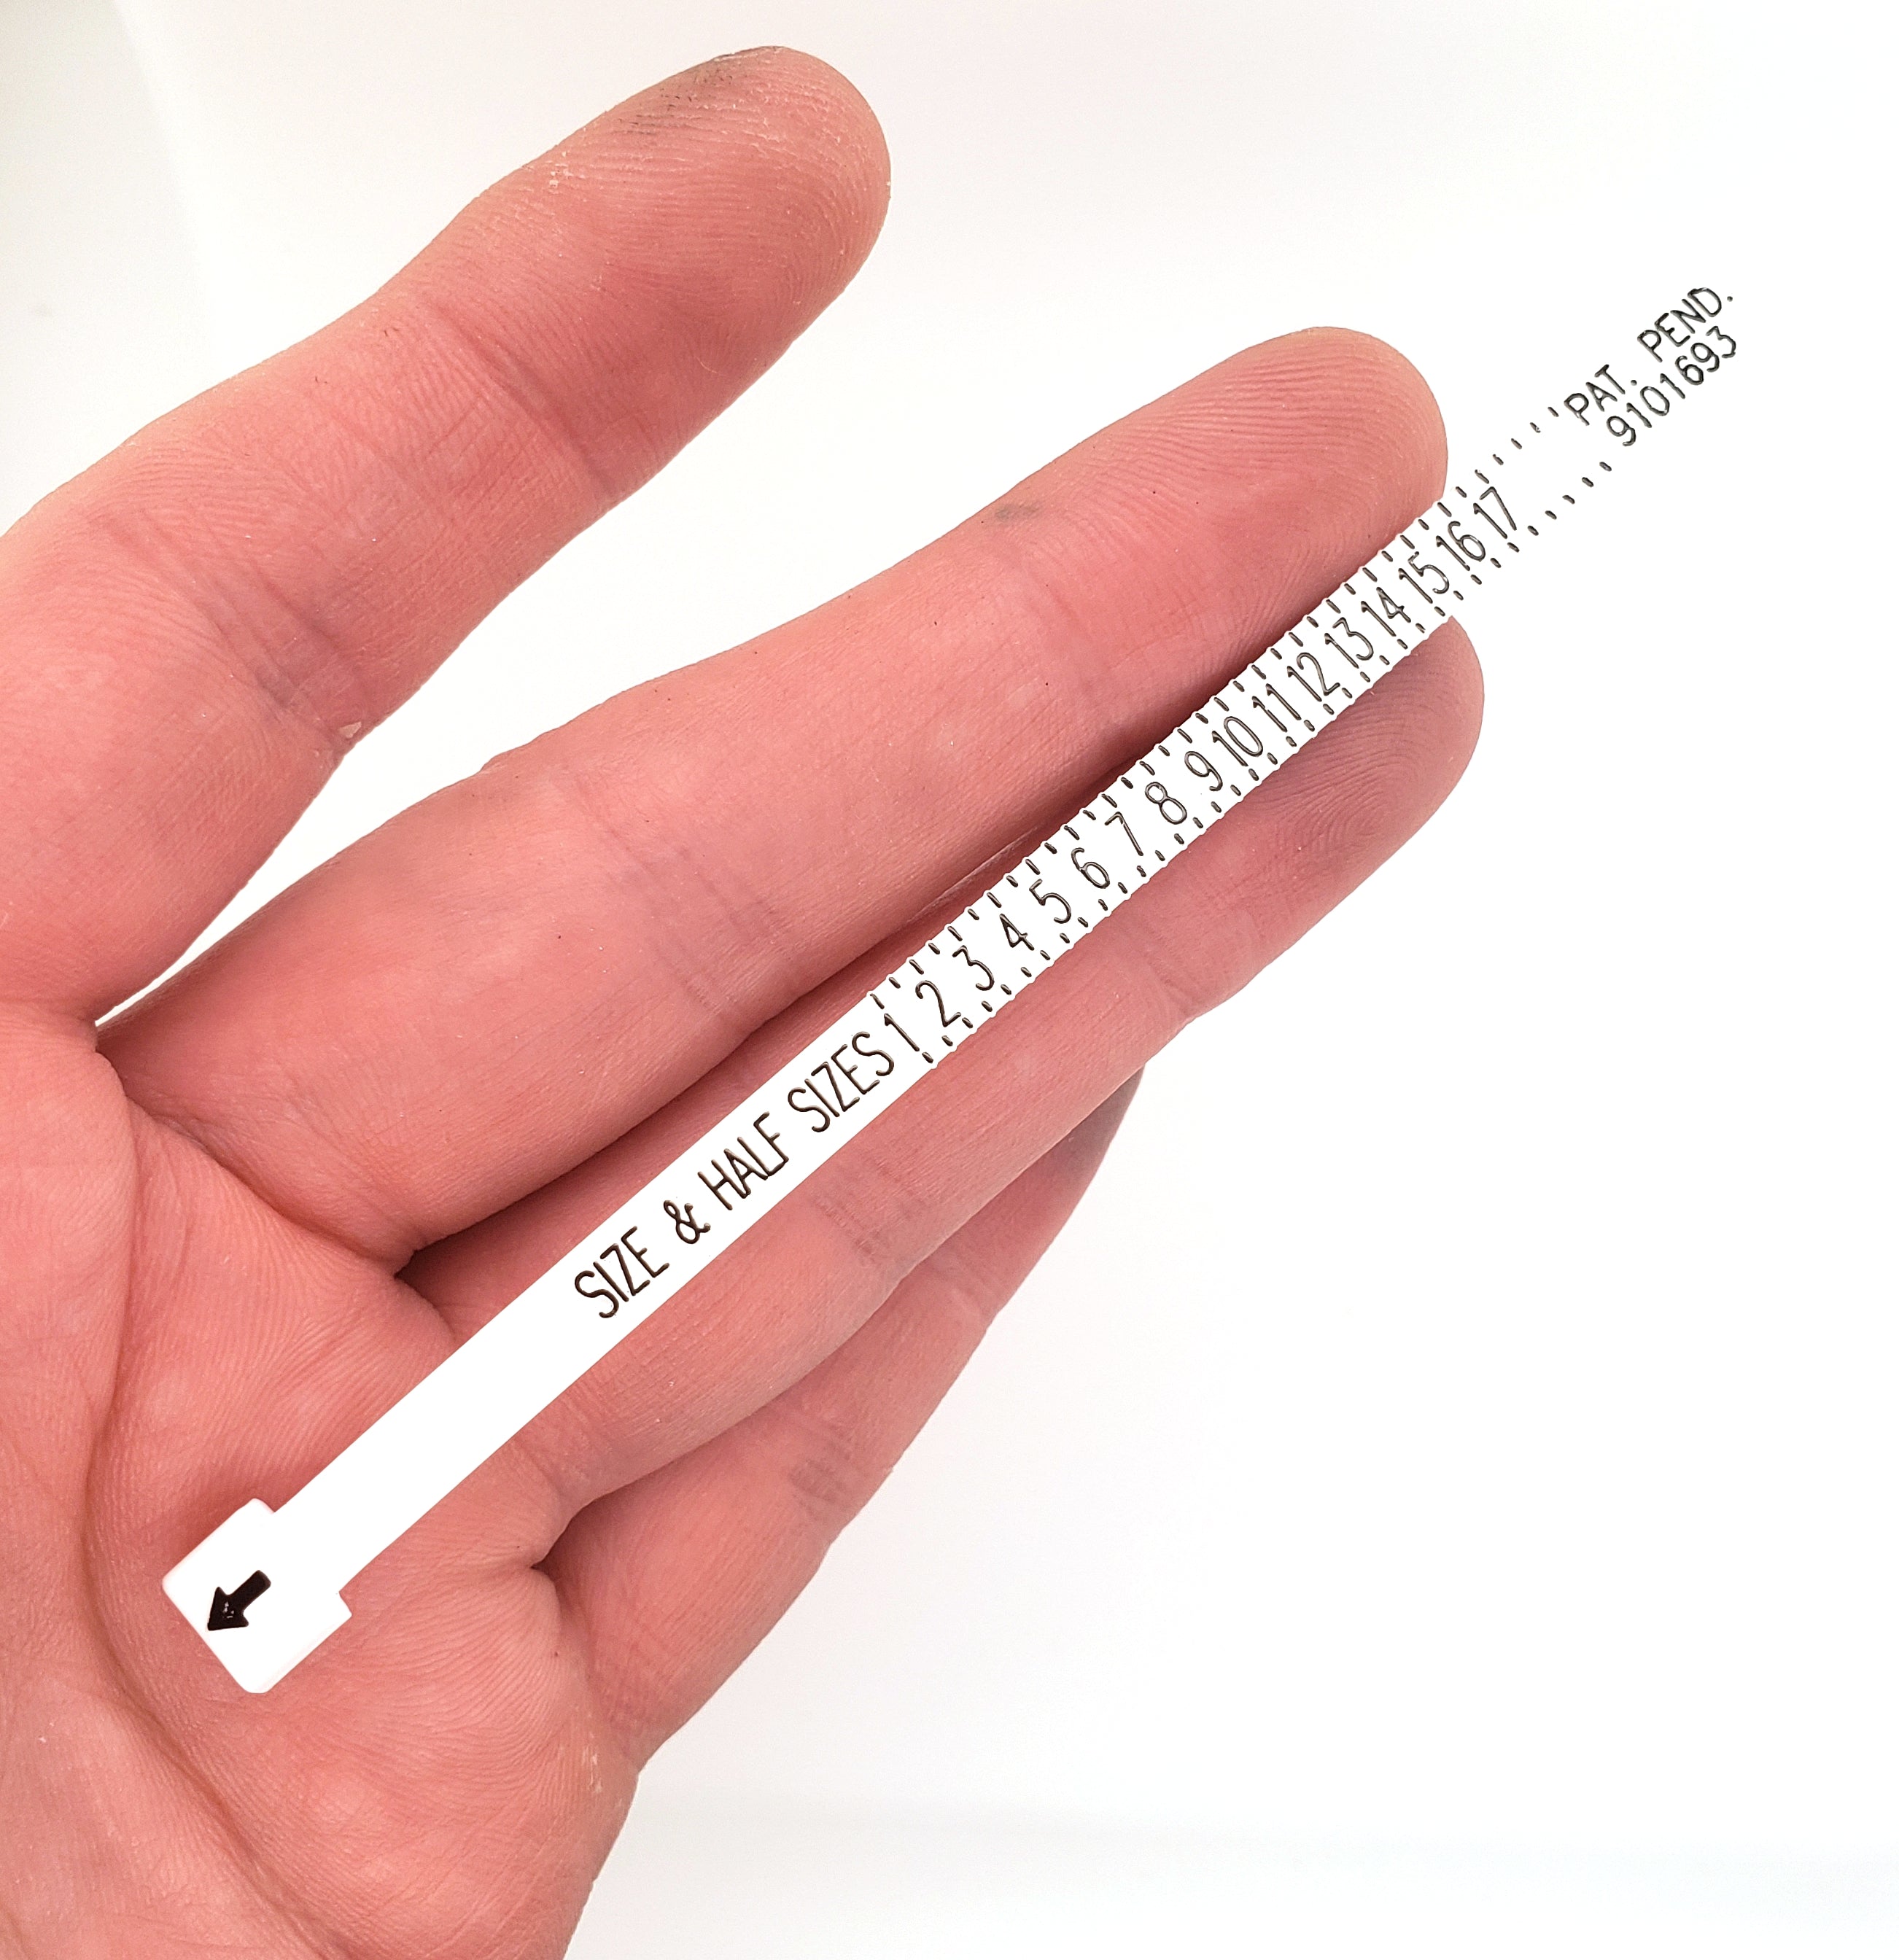 Reusable Ring Sizer, Tool to Find Your Ring Size – KathrynRiechert